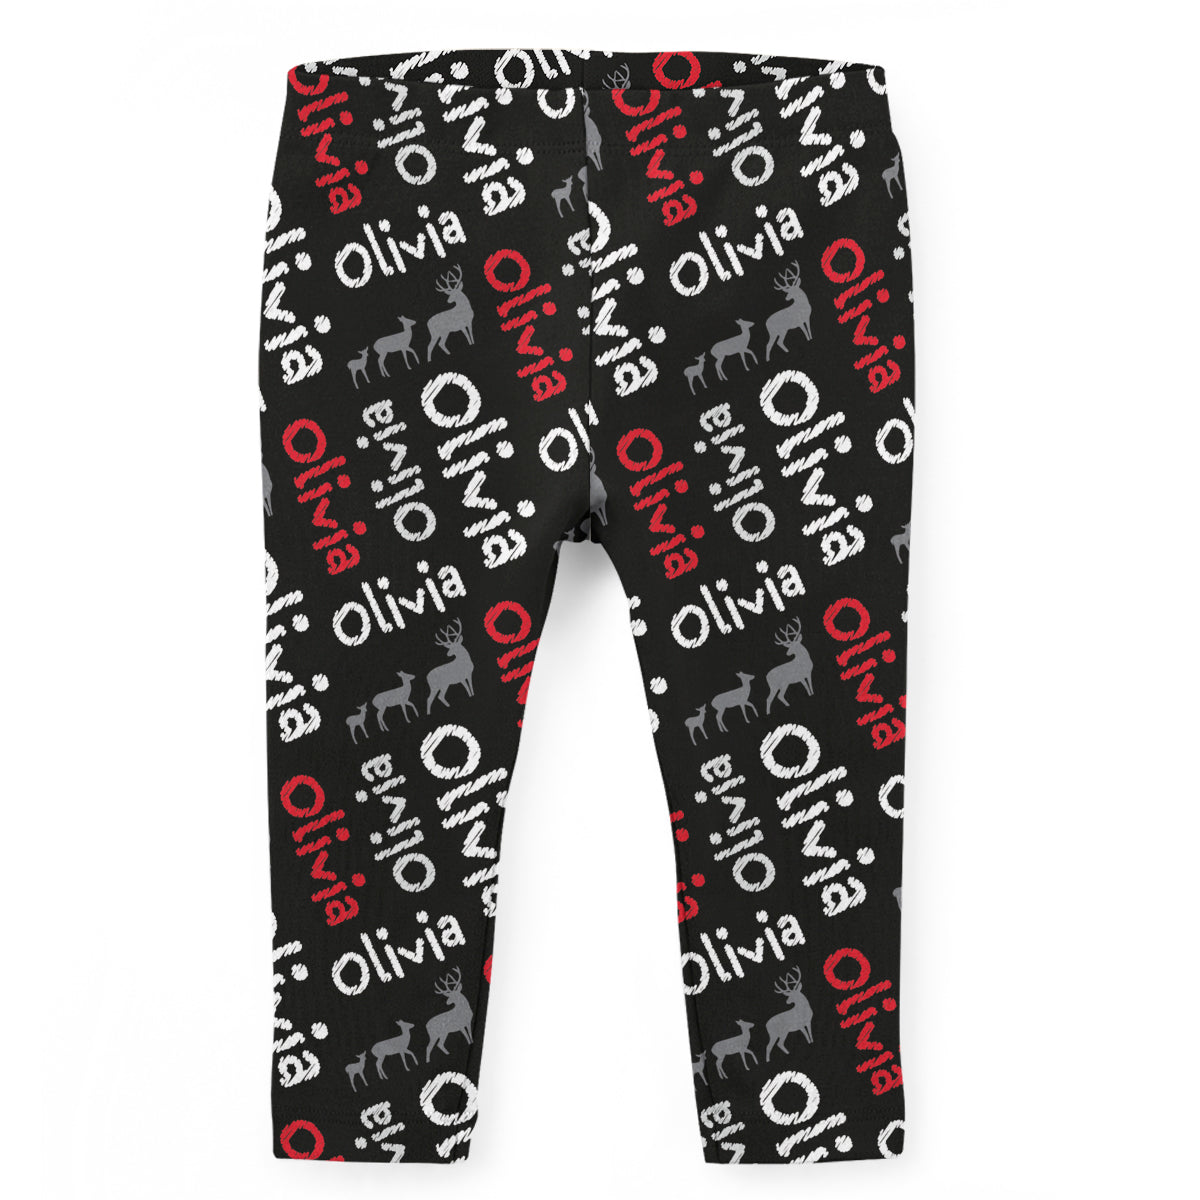 Girls black and red deer leggings with name - Wimziy&Co.